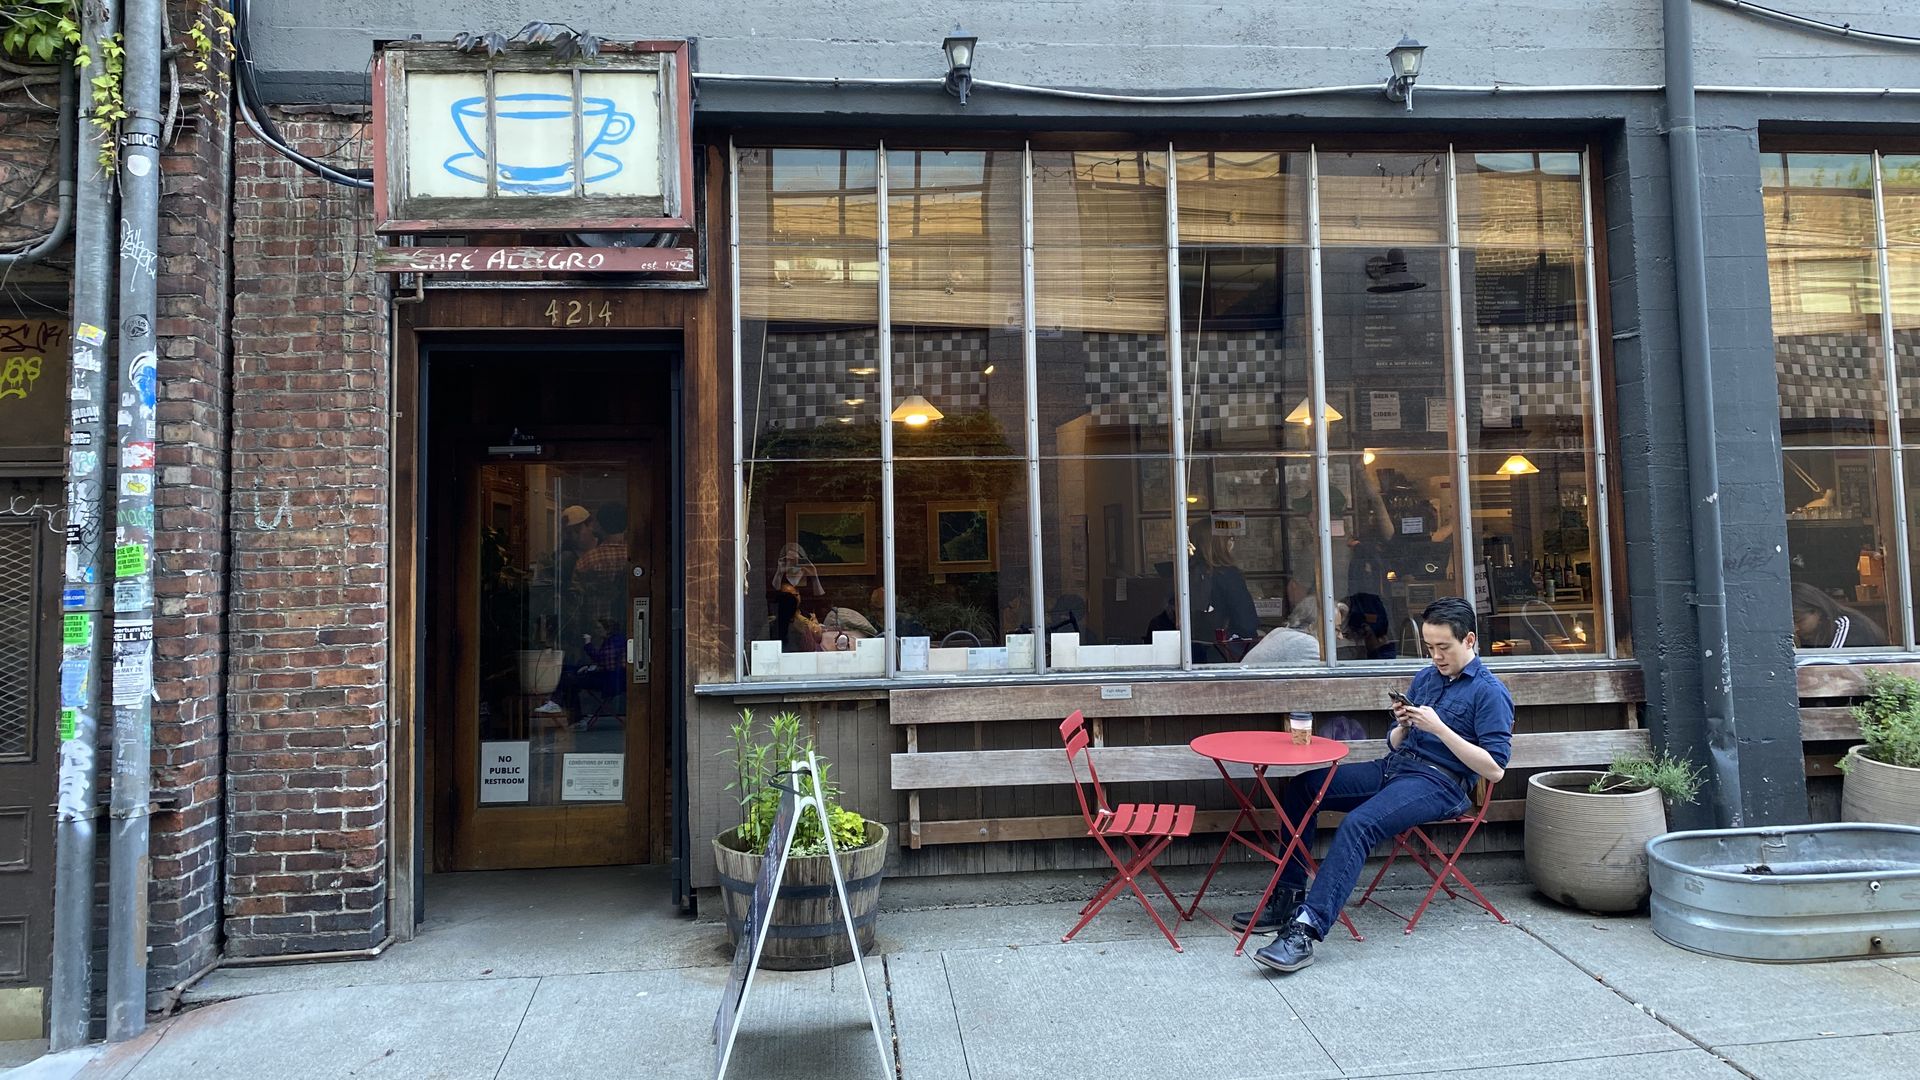 A cafe exterior with a hanging sign with a blue coffee mug, large windows, a sandwich board outside and a person sitting at a red cafe table outside .